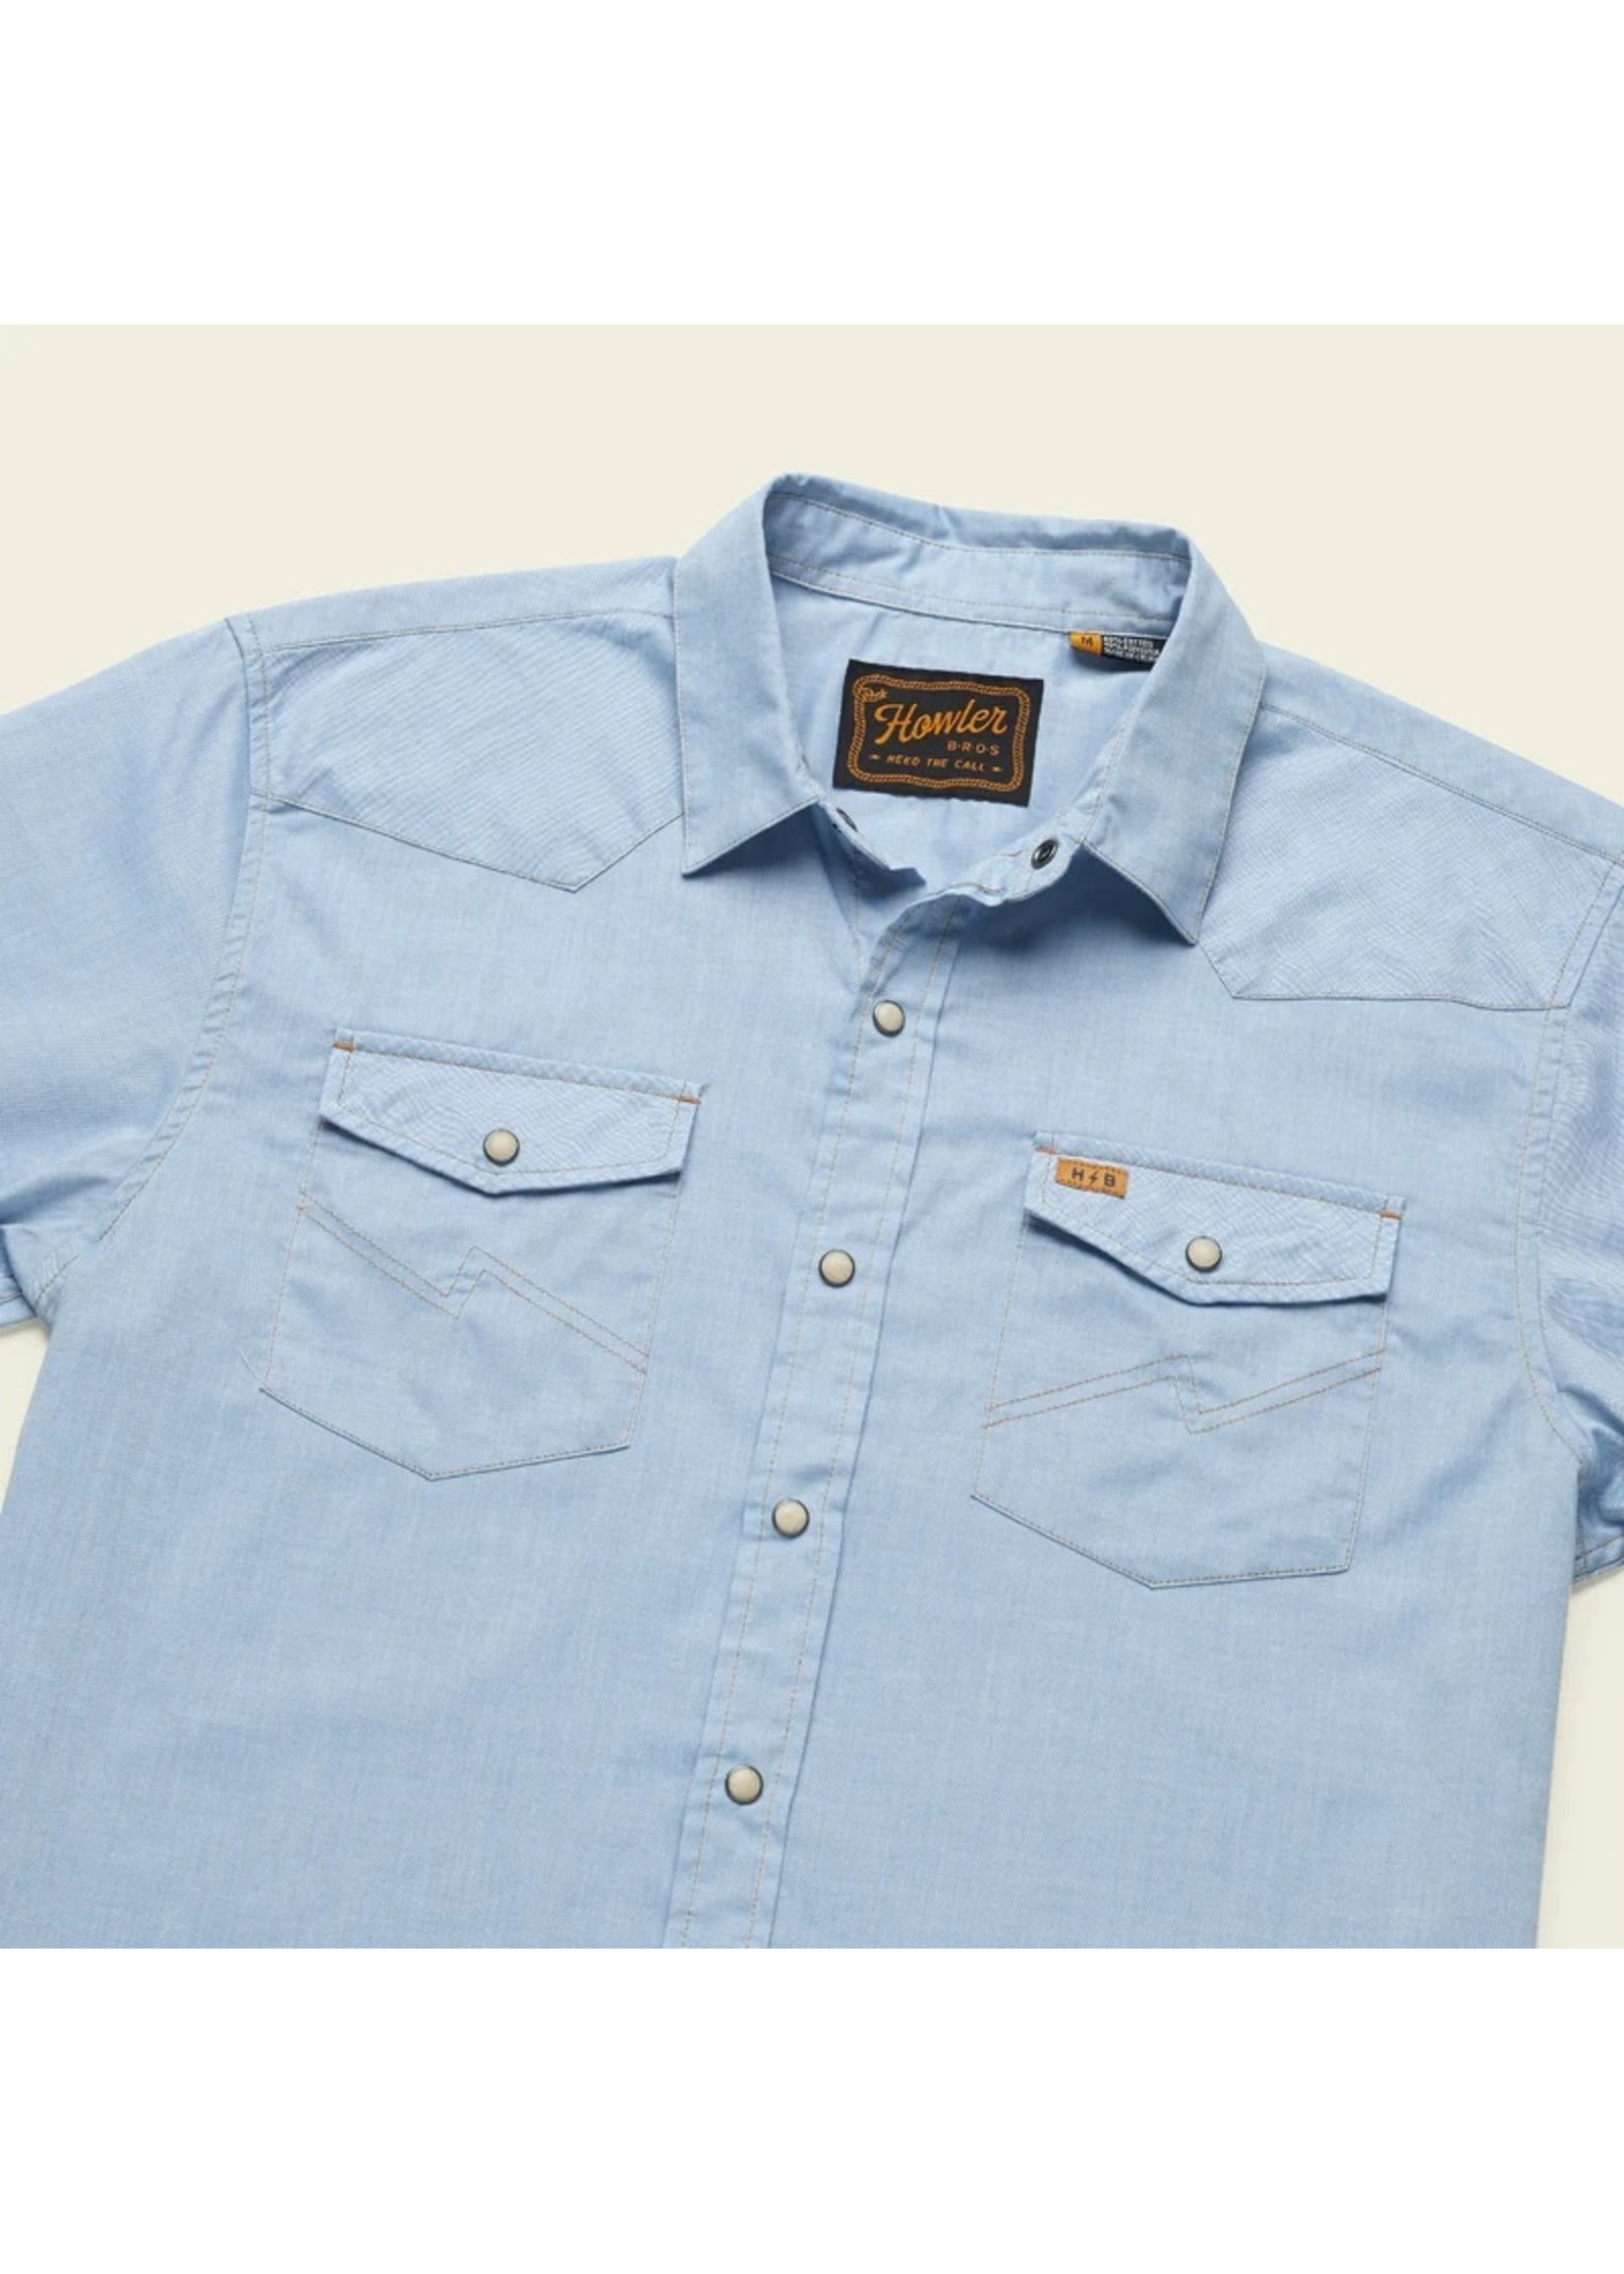 Howler Brothers H Bar B Snapshirt - Faded Blue Oxford